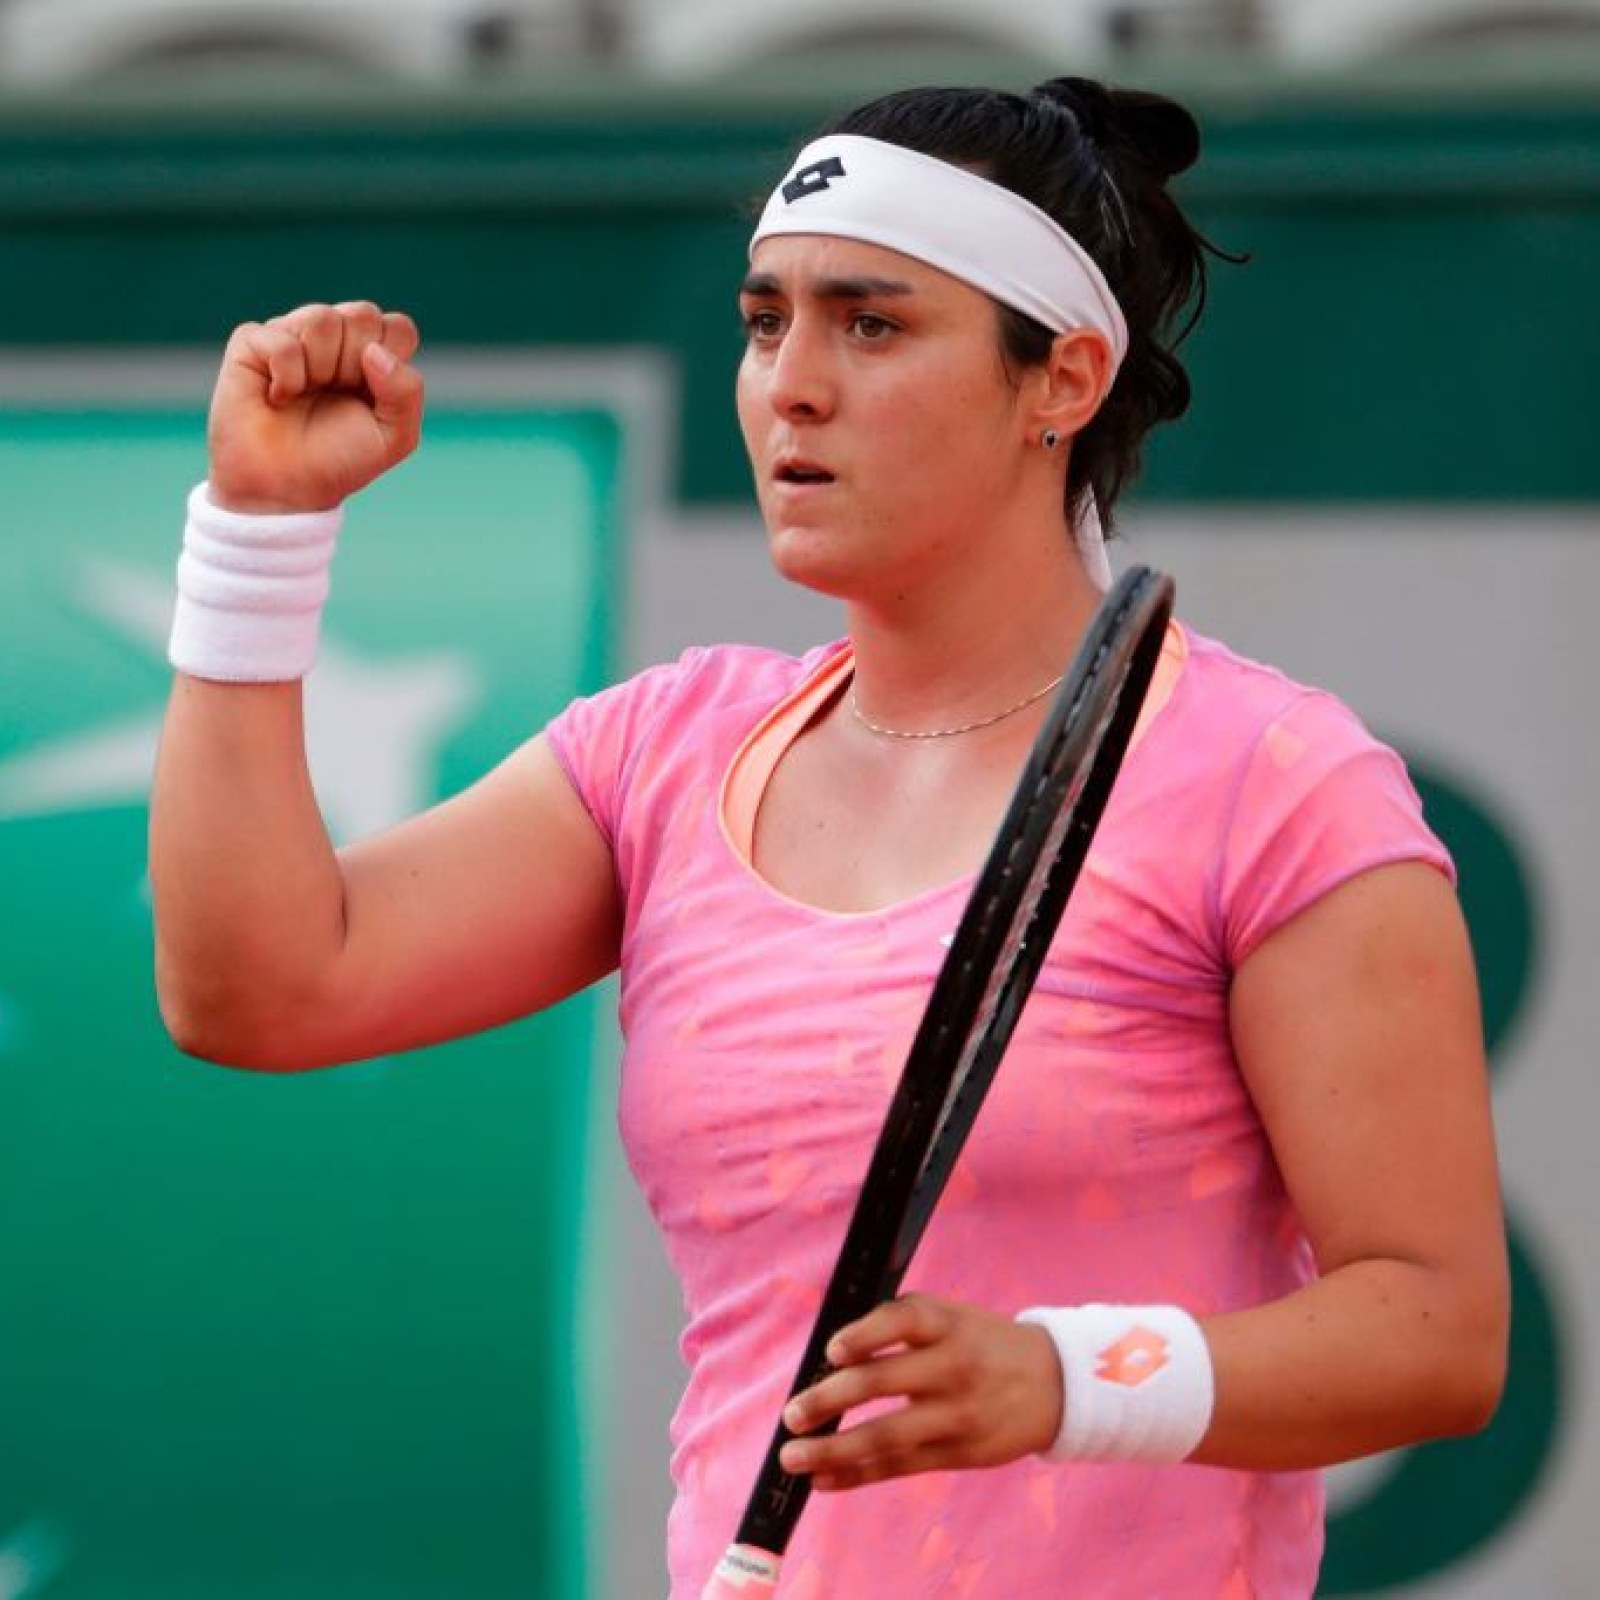 Uredelighed Saks Sanselig French Open: Who Is Ons Jabeur, the Woman Making History in Tennis?